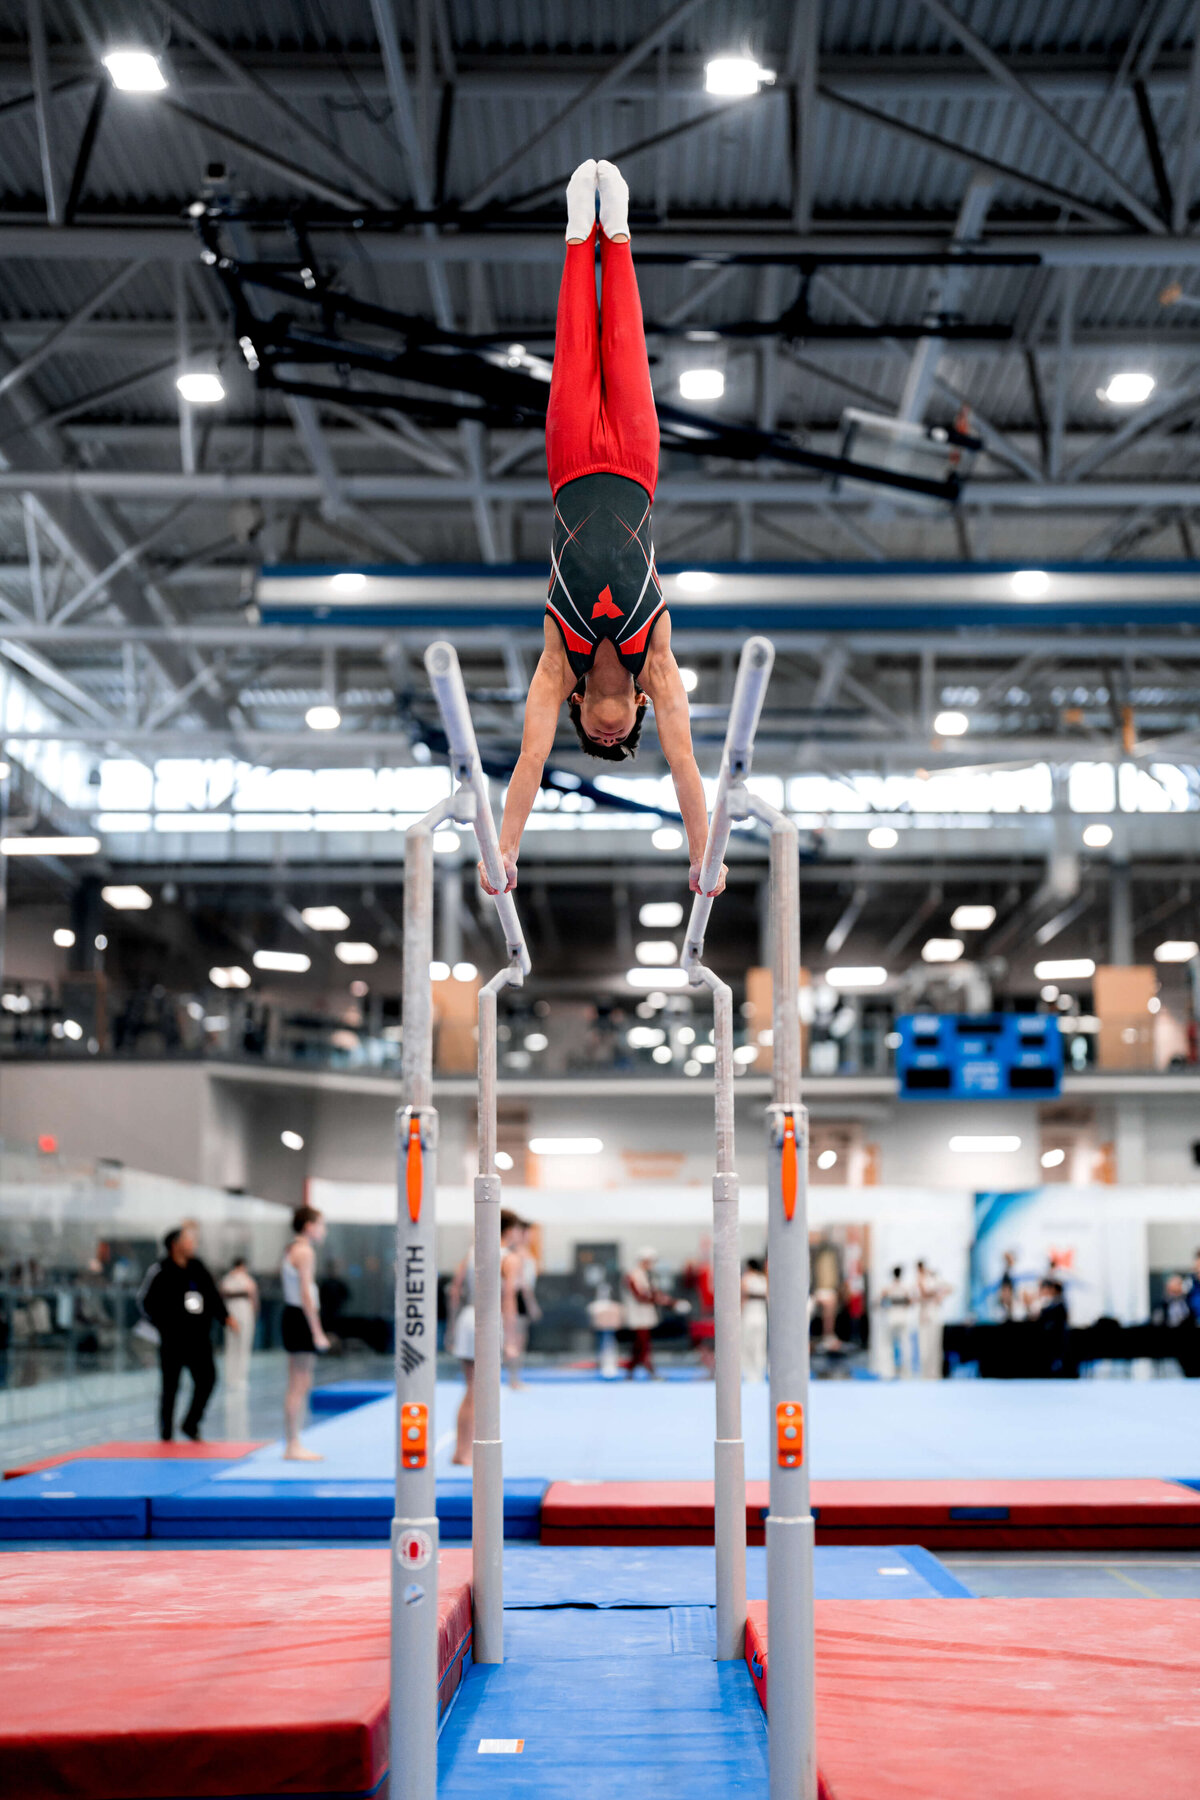 Photo by Luke O'Geil taken at the 2023 inaugural Grizzly Classic men's artistic gymnastics competitionA9_00179